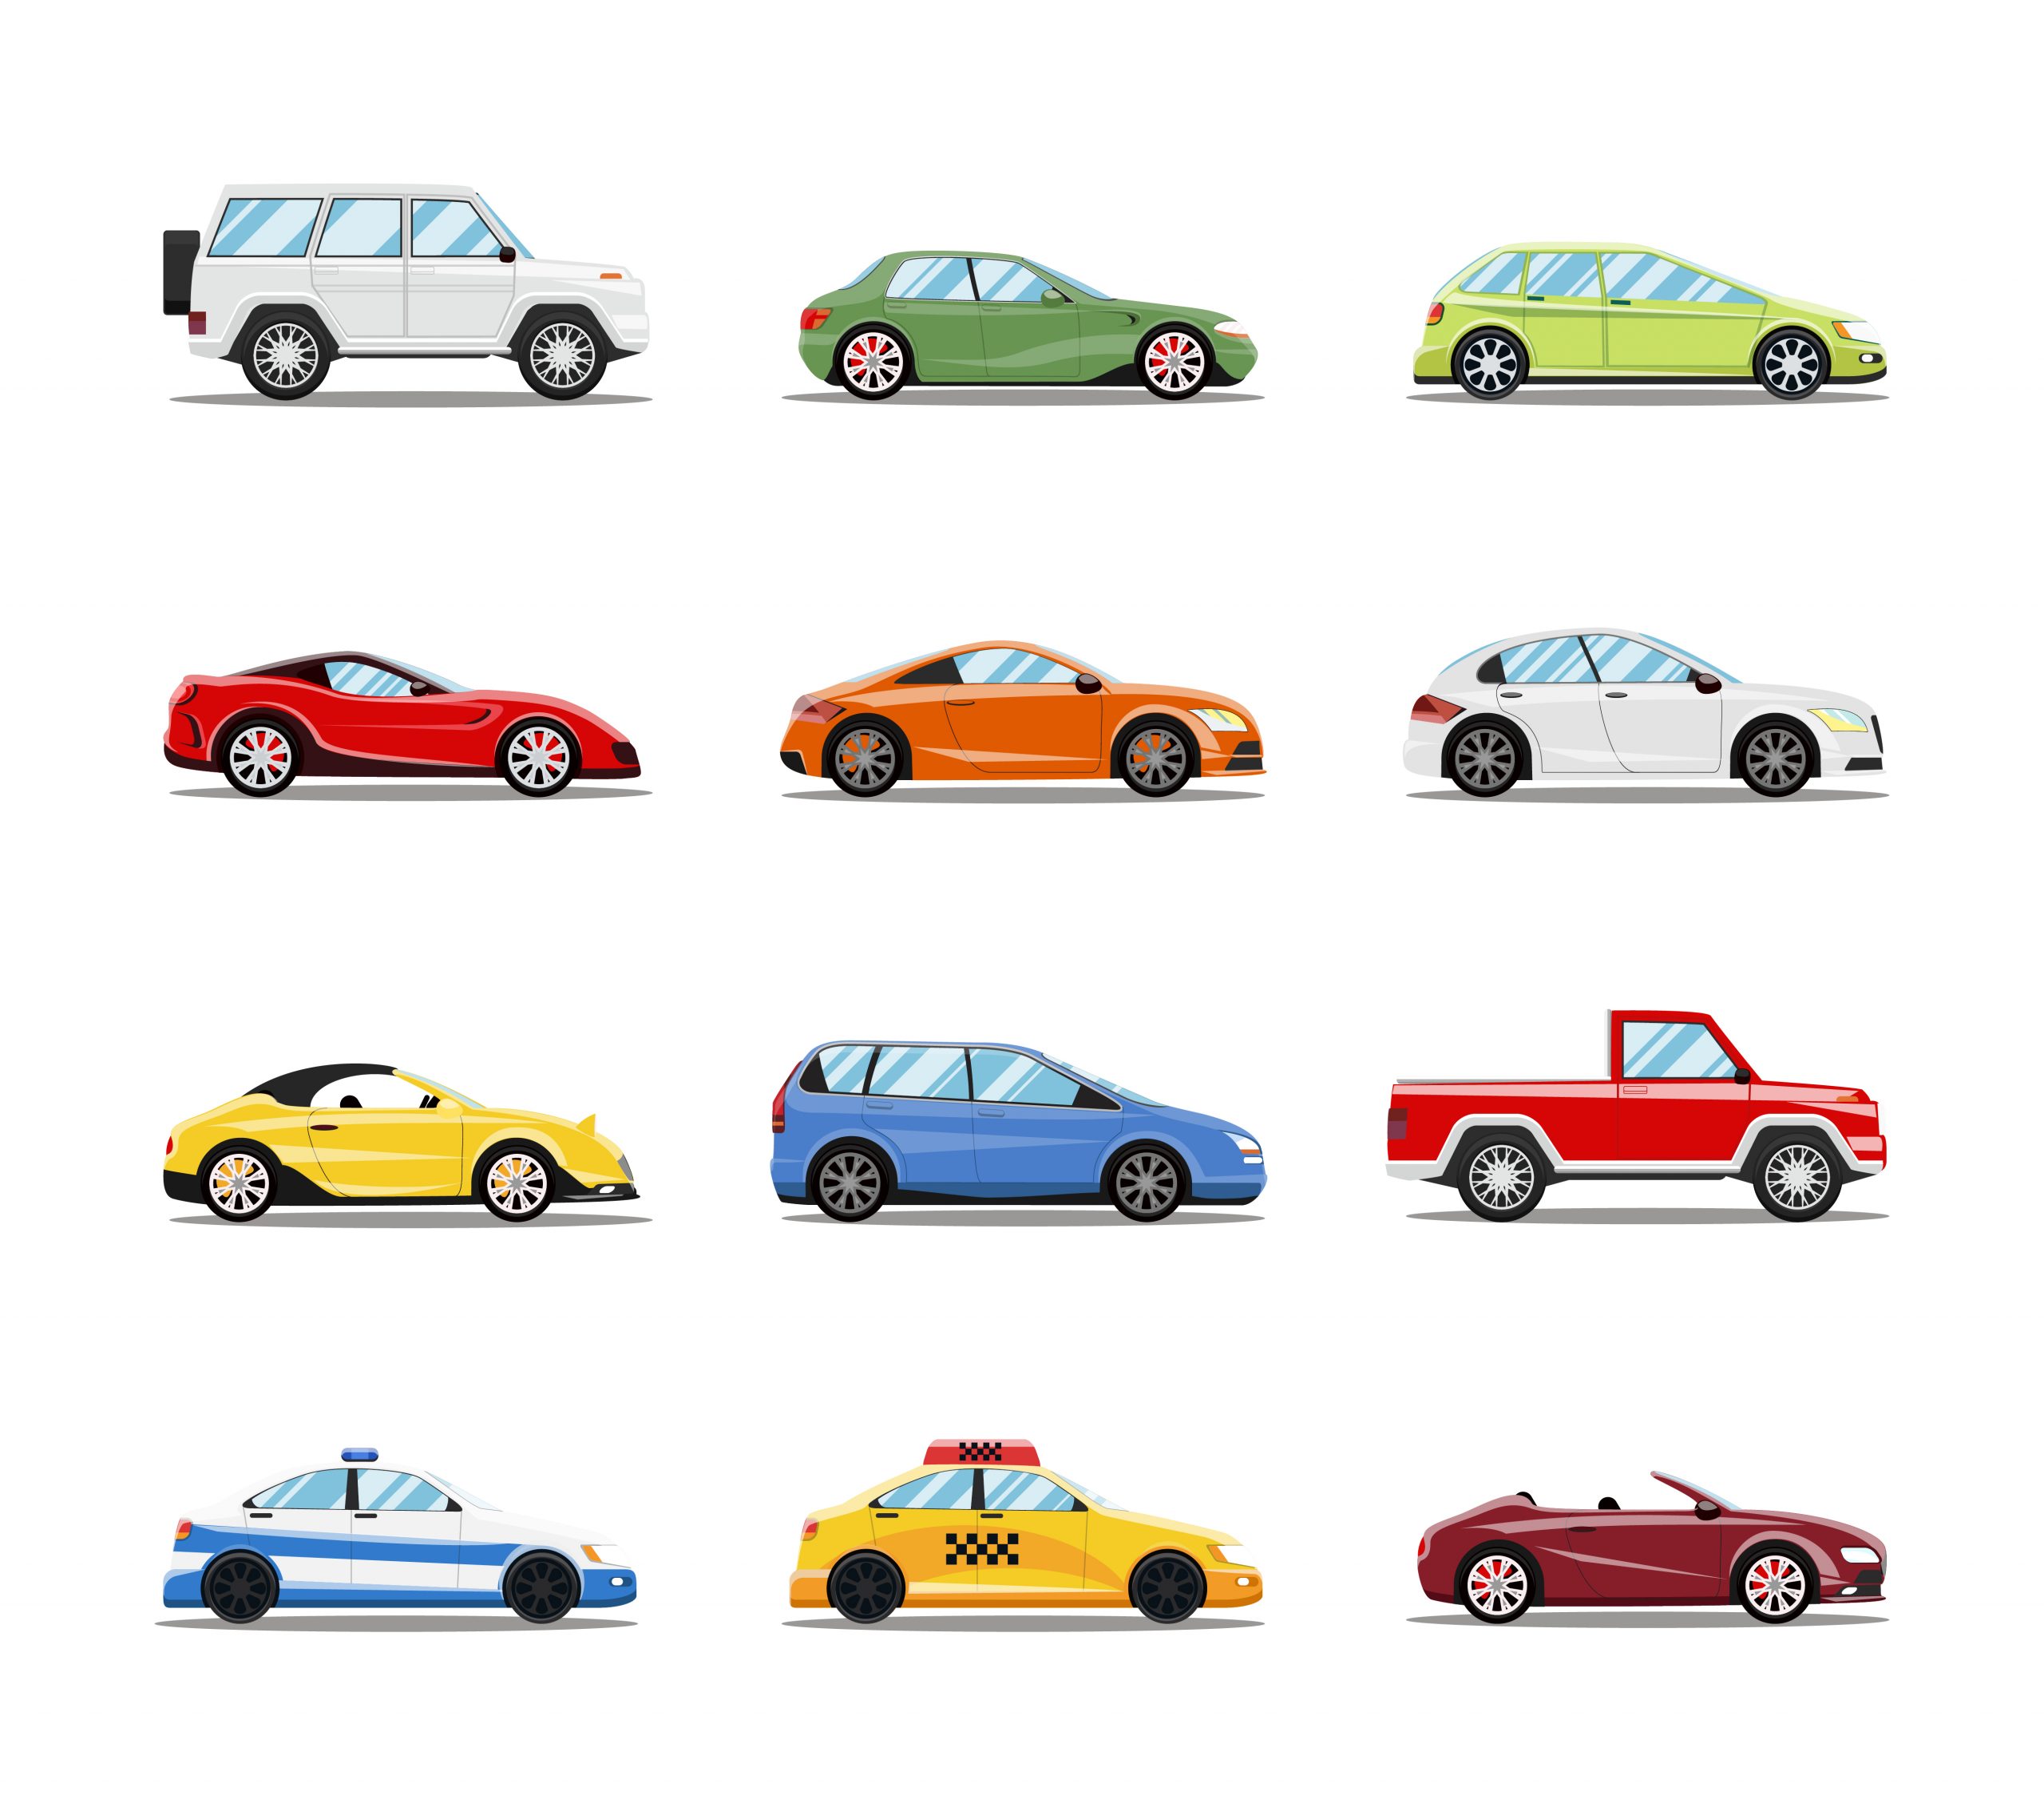 Image shows a 4x3 grid of cars of differing colors and sizes